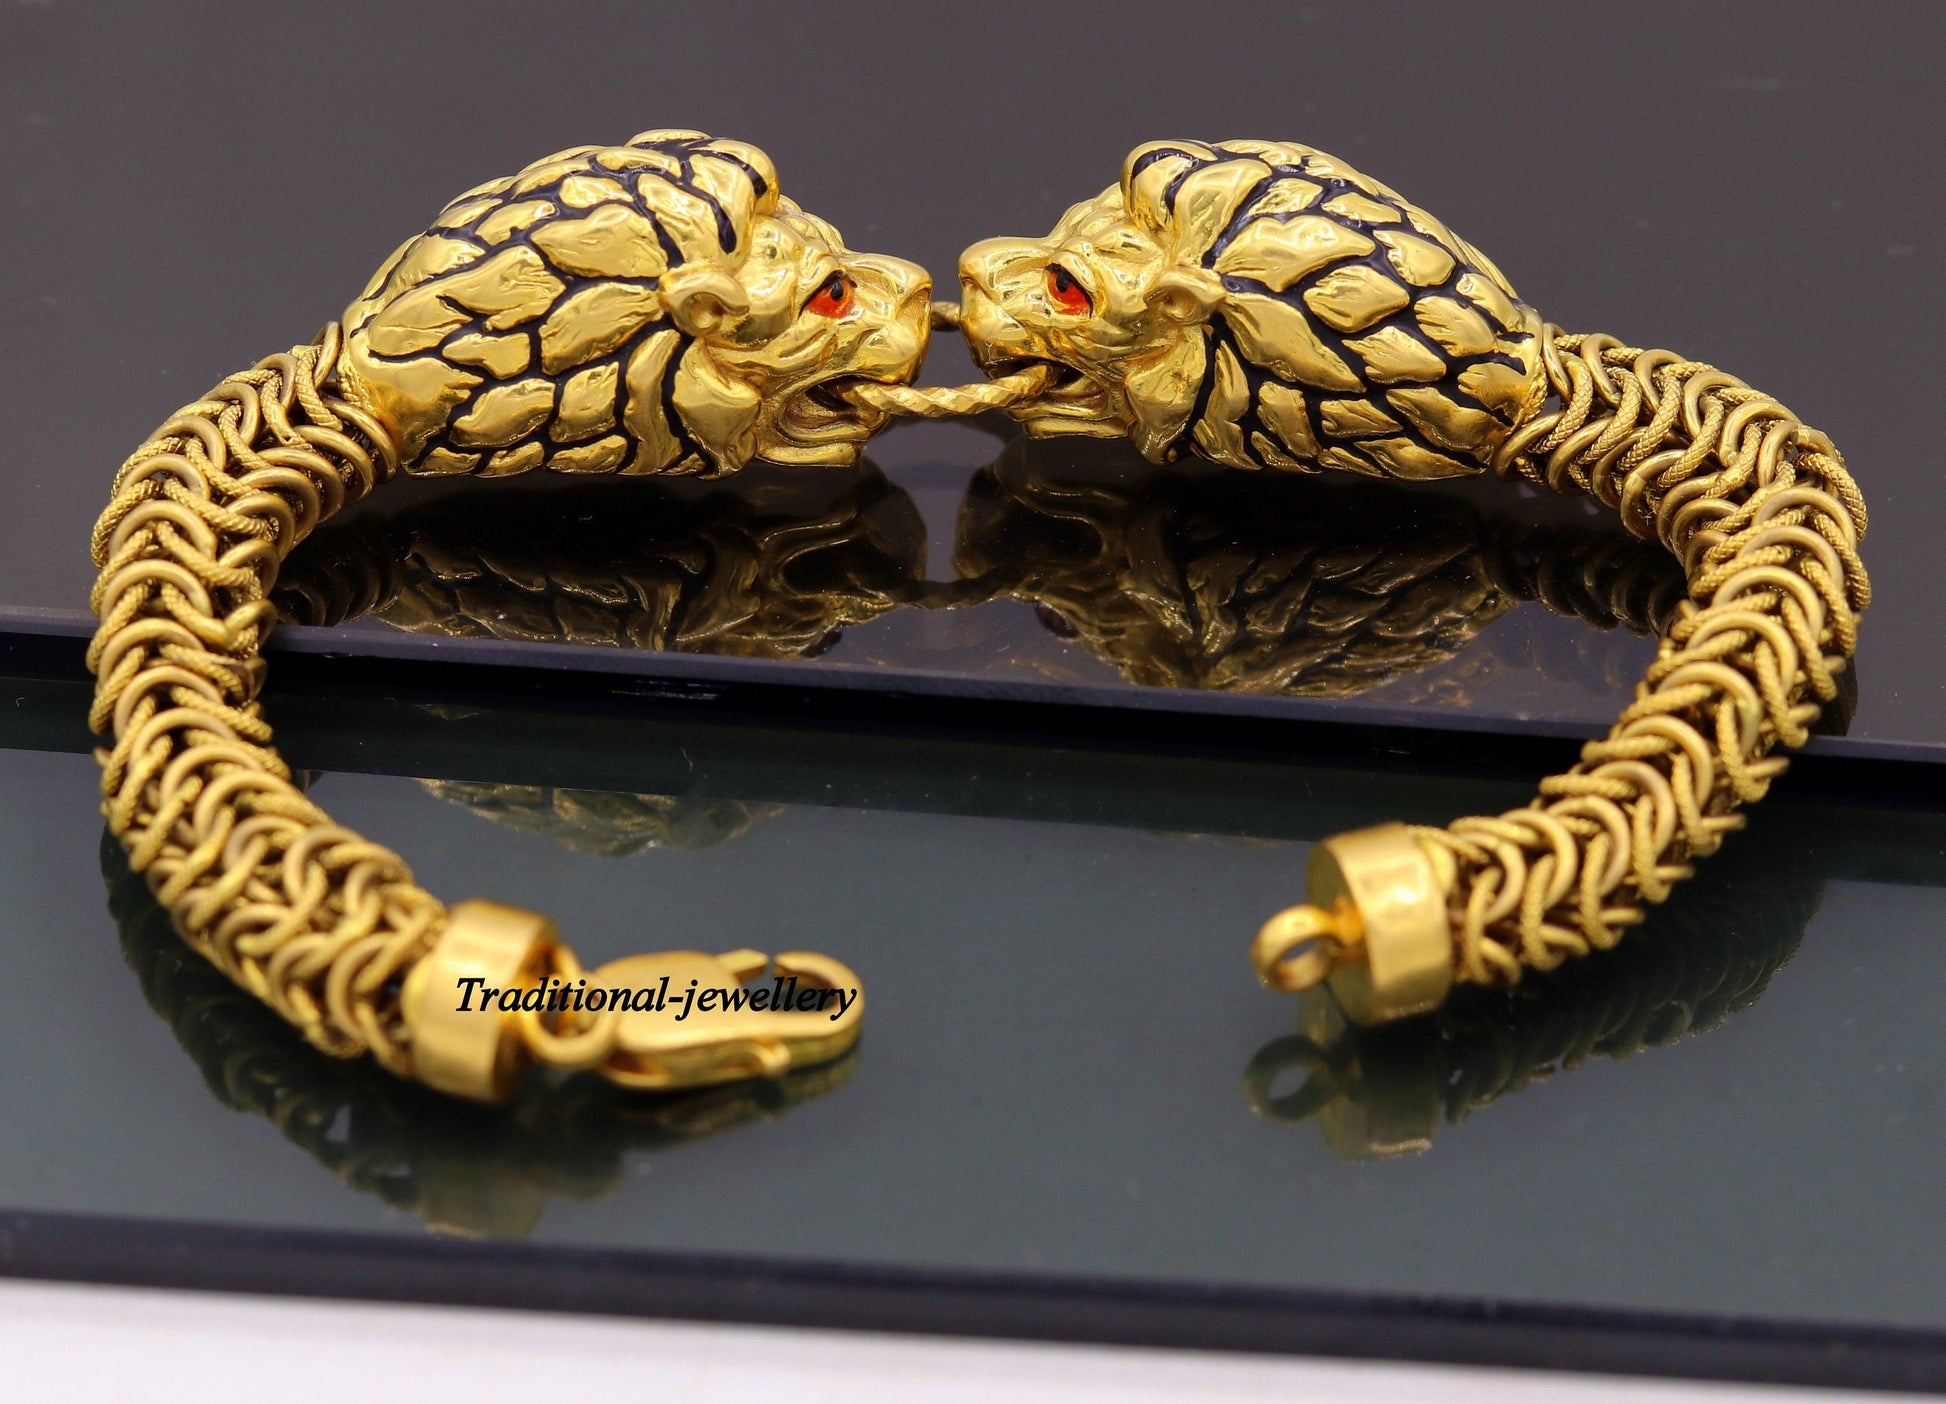 Vintage antique stylish handmade lion bracelet in solid hallmarked 22kt yellow  gold men's bracelet lion face daily use jewelry